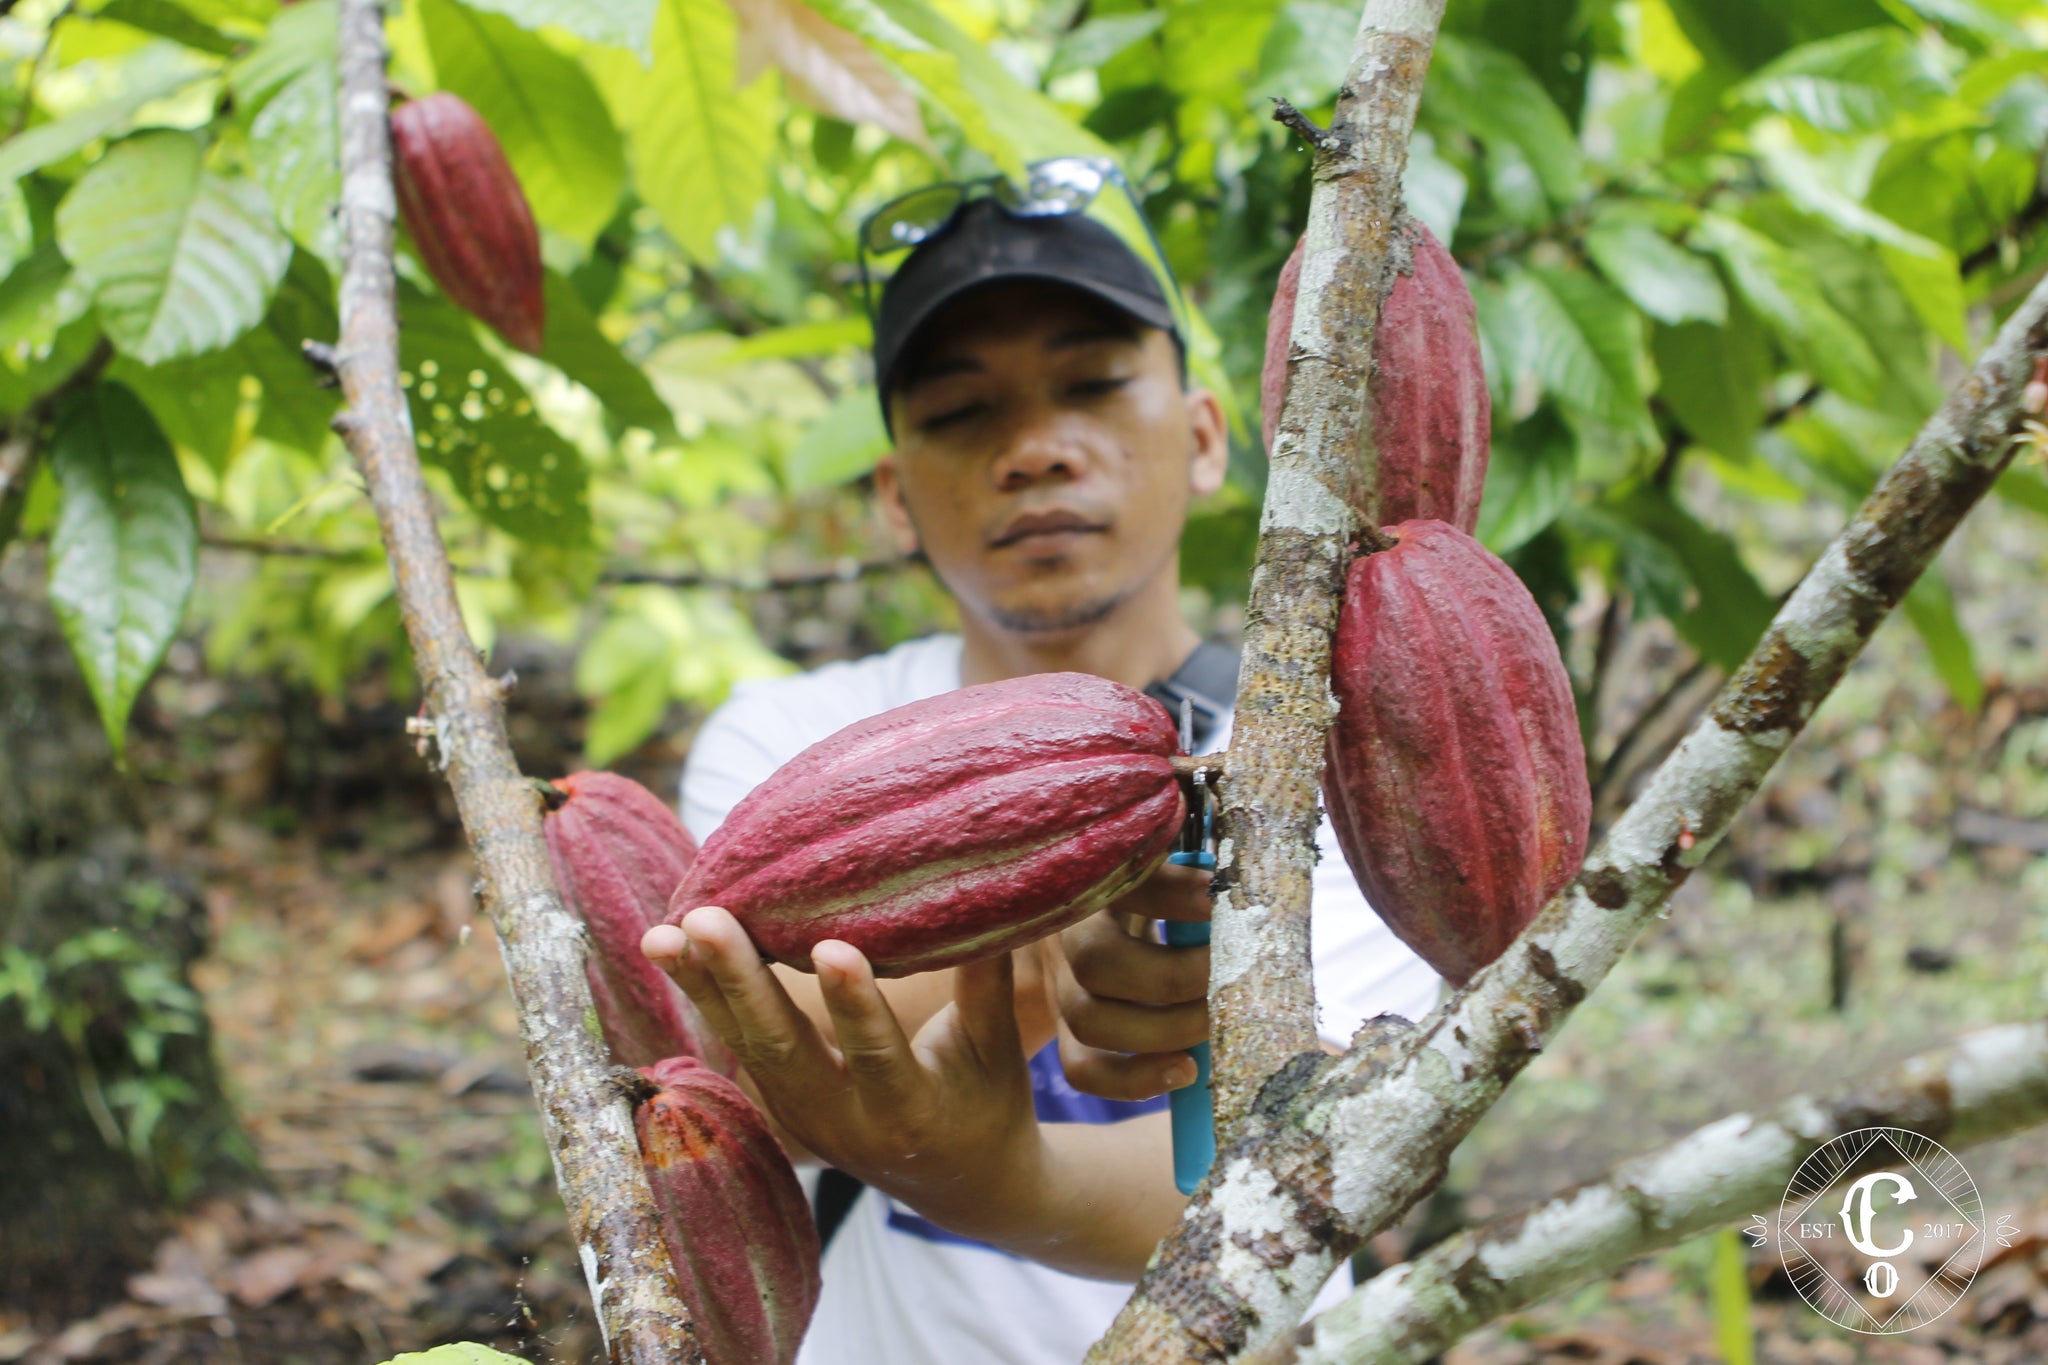 Co Chocolat Harvesting of Ripe Cacao Pods